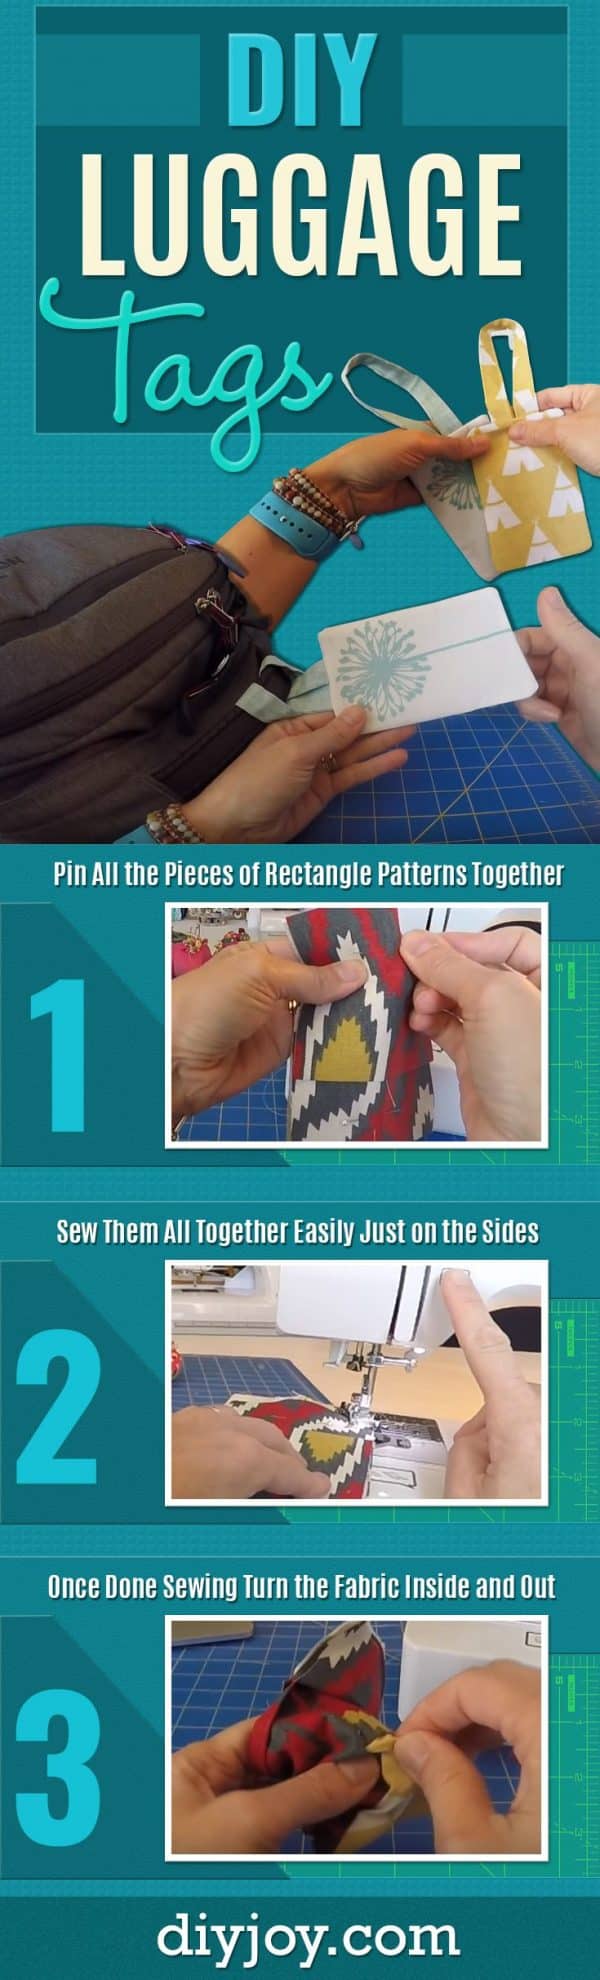 Easy To Make DIY Luggage Tags - Cheap and Quick Gift Idea and Easy Sewing Tutorial - Easy DIY Gifts for Friends and Family Who Like To Travel